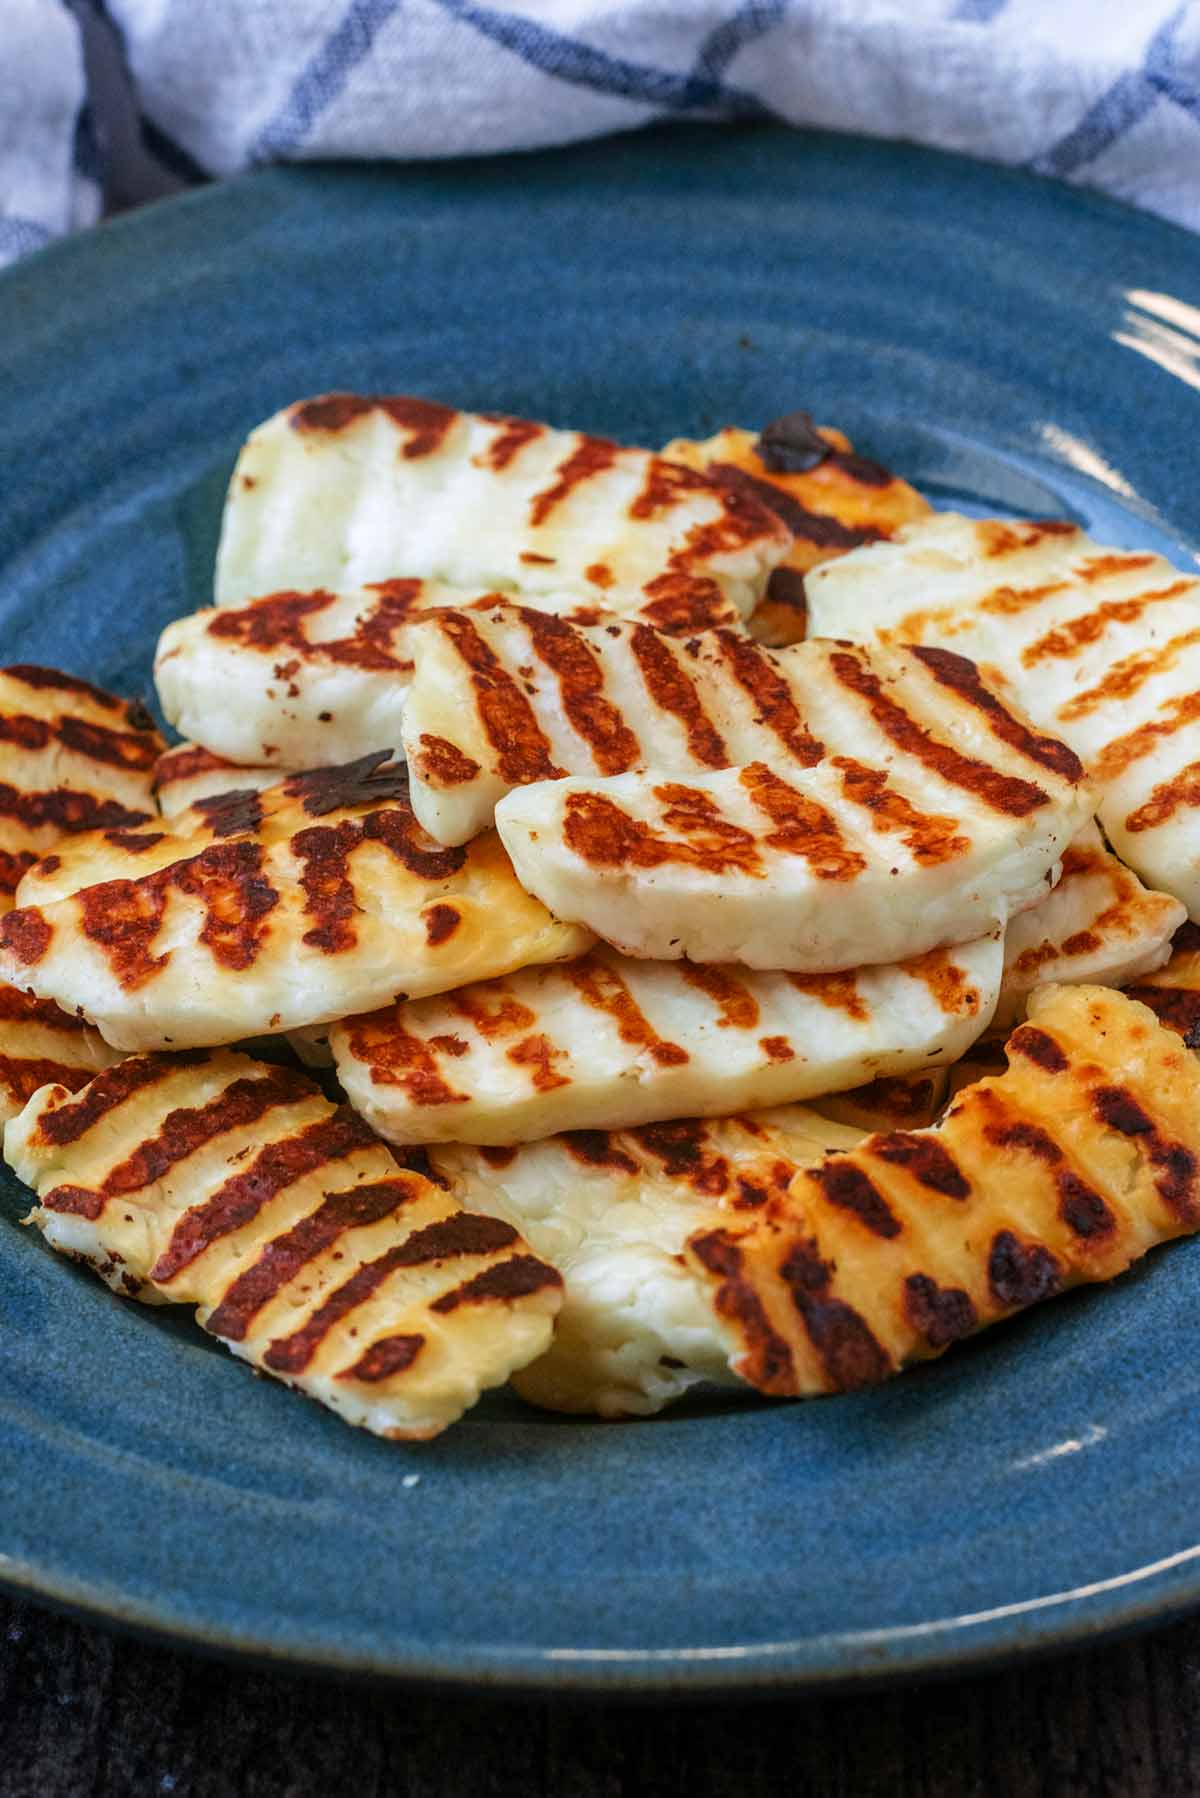 Cooked halloumi slices on a blue plate in front of a checked towel.